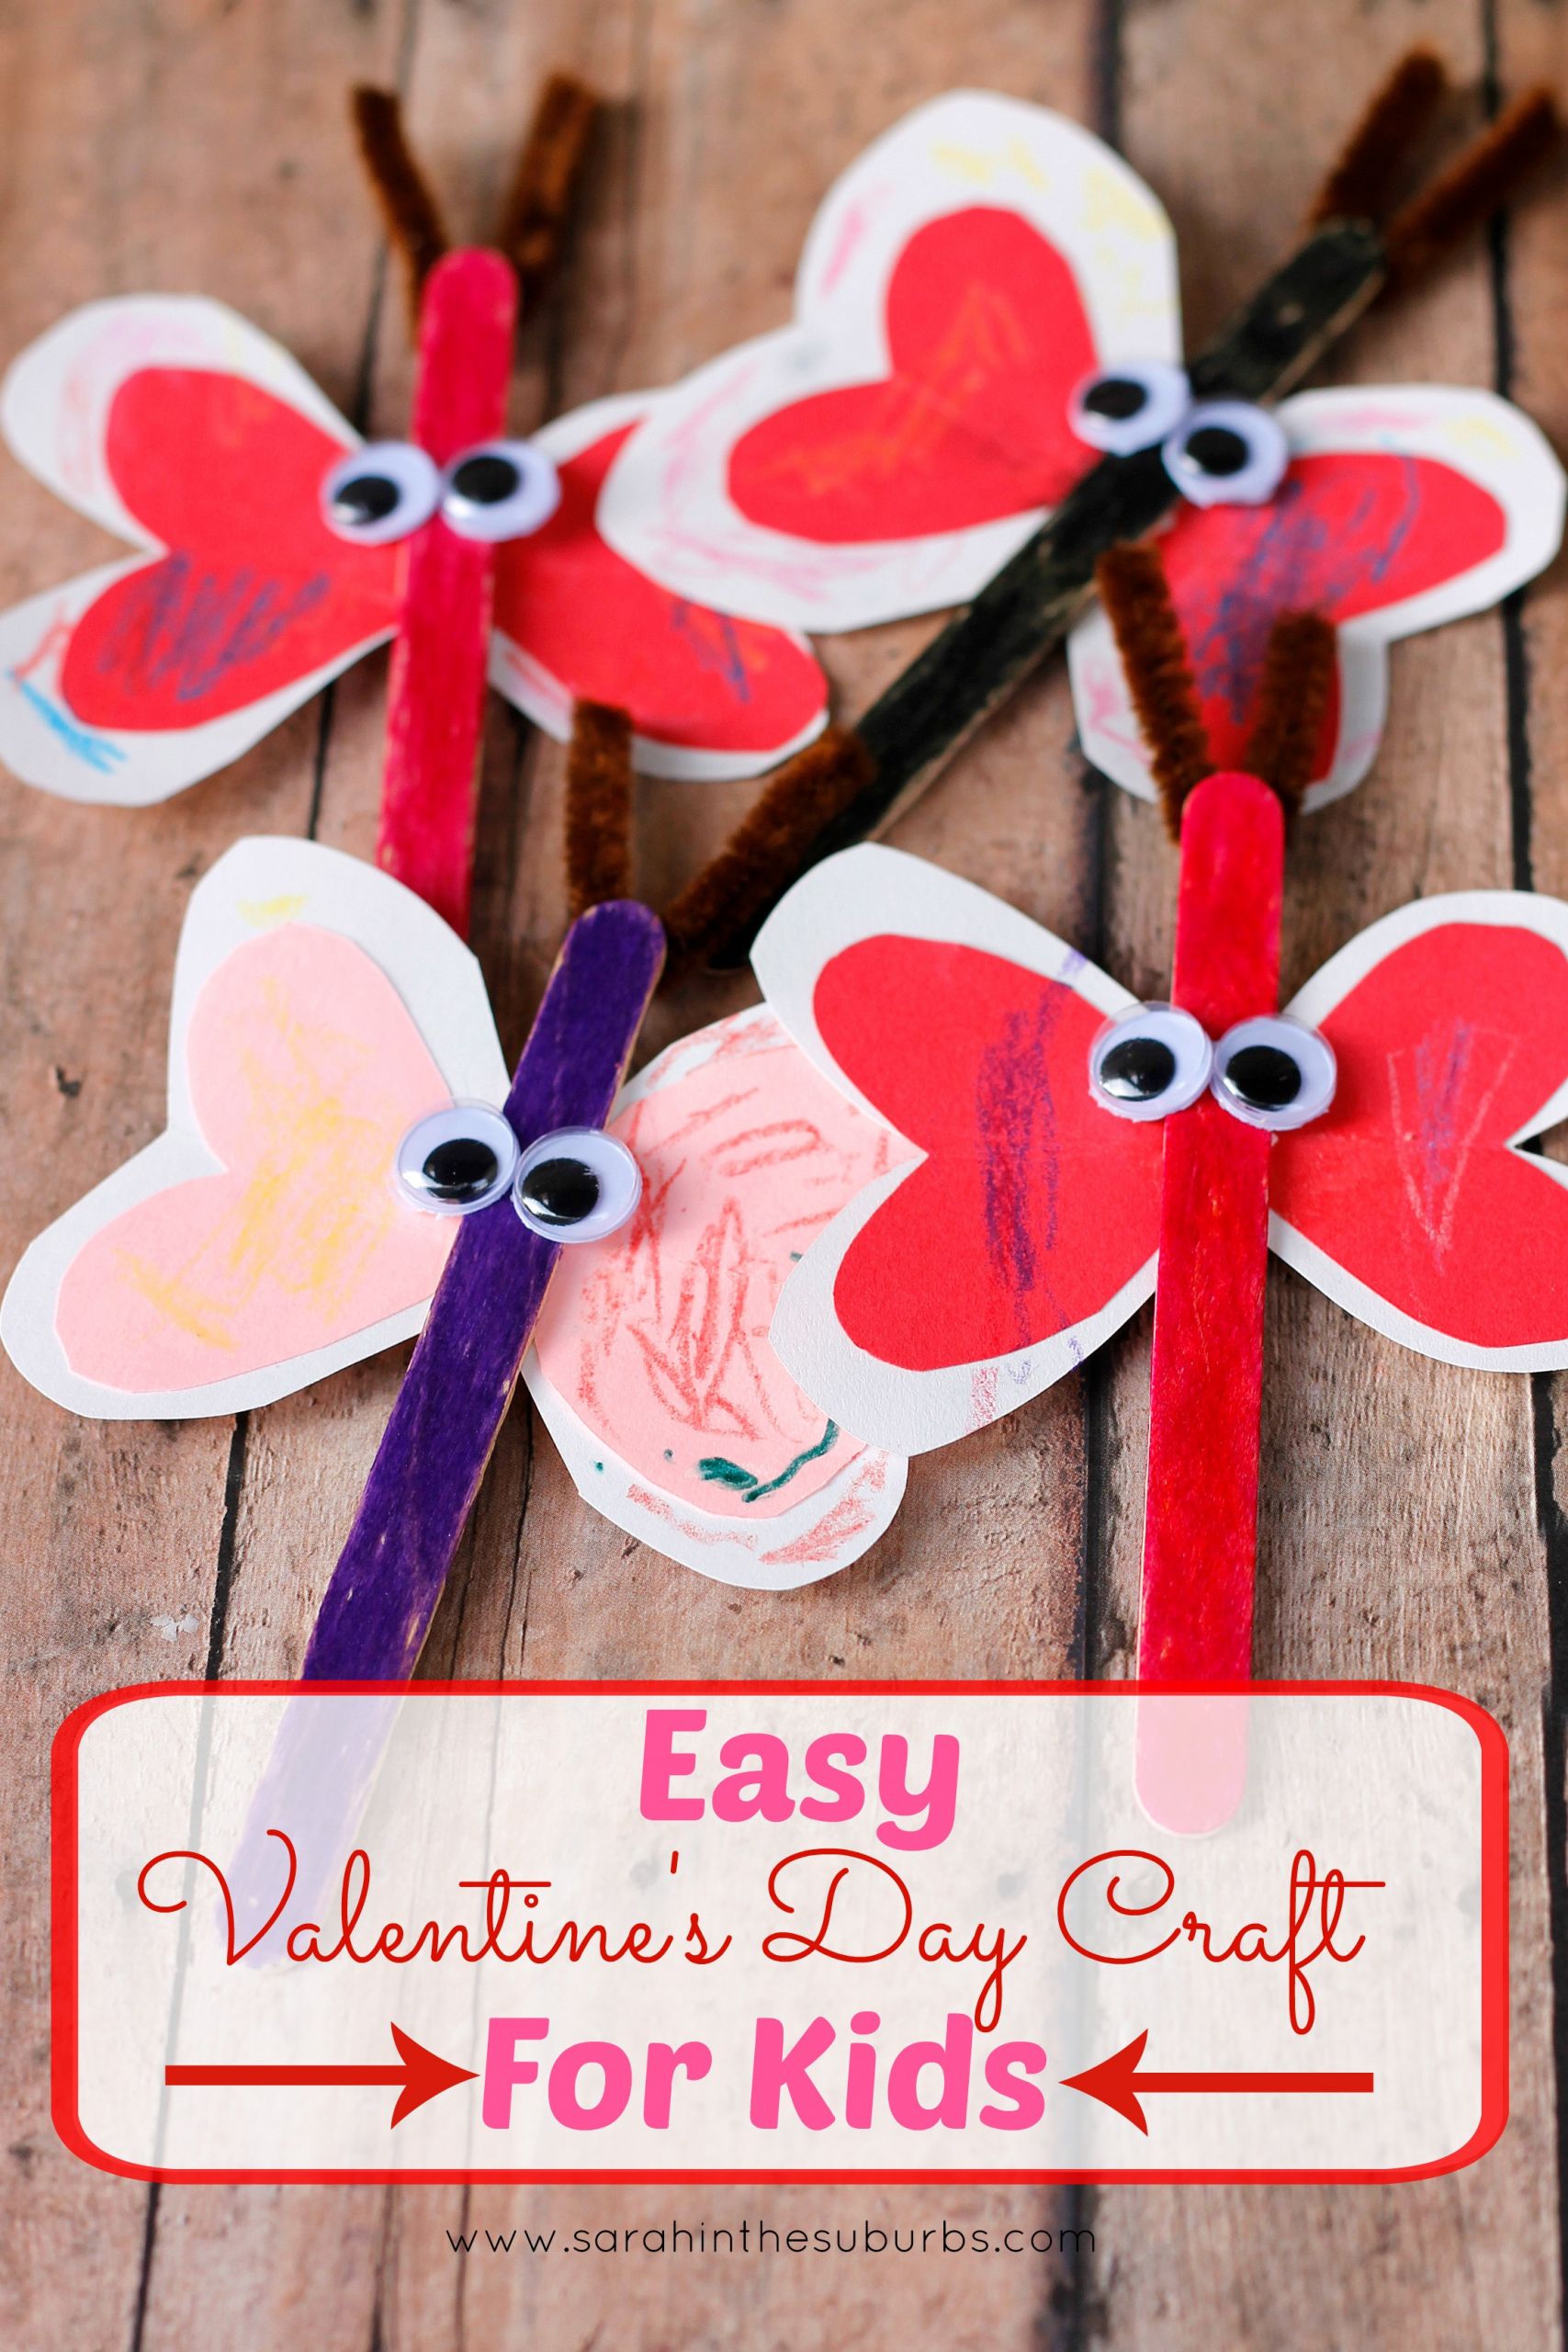 Valentines Craft For Kids
 Love Bug Valentine s Day Craft for Kids Sarah in the Suburbs